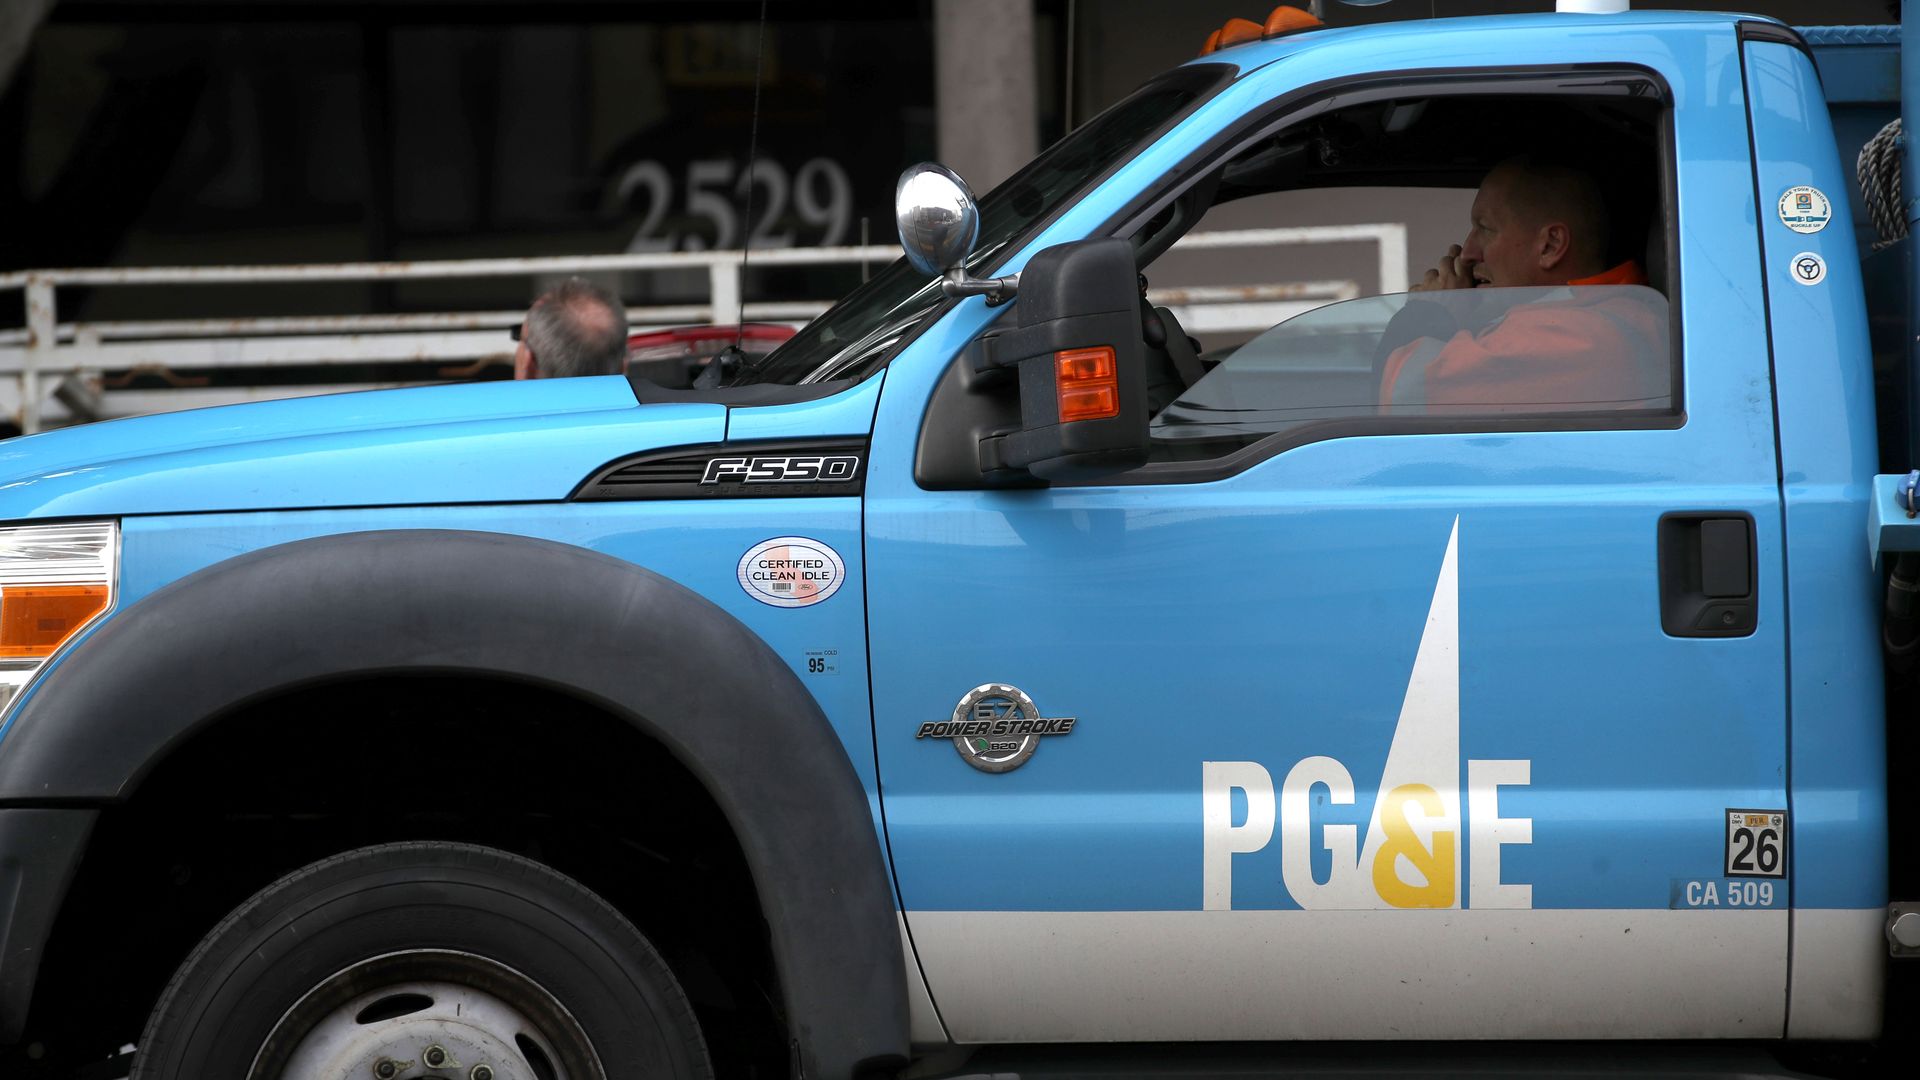 In this image, a man talks on the phone while driving a truck with the PG&E logo.